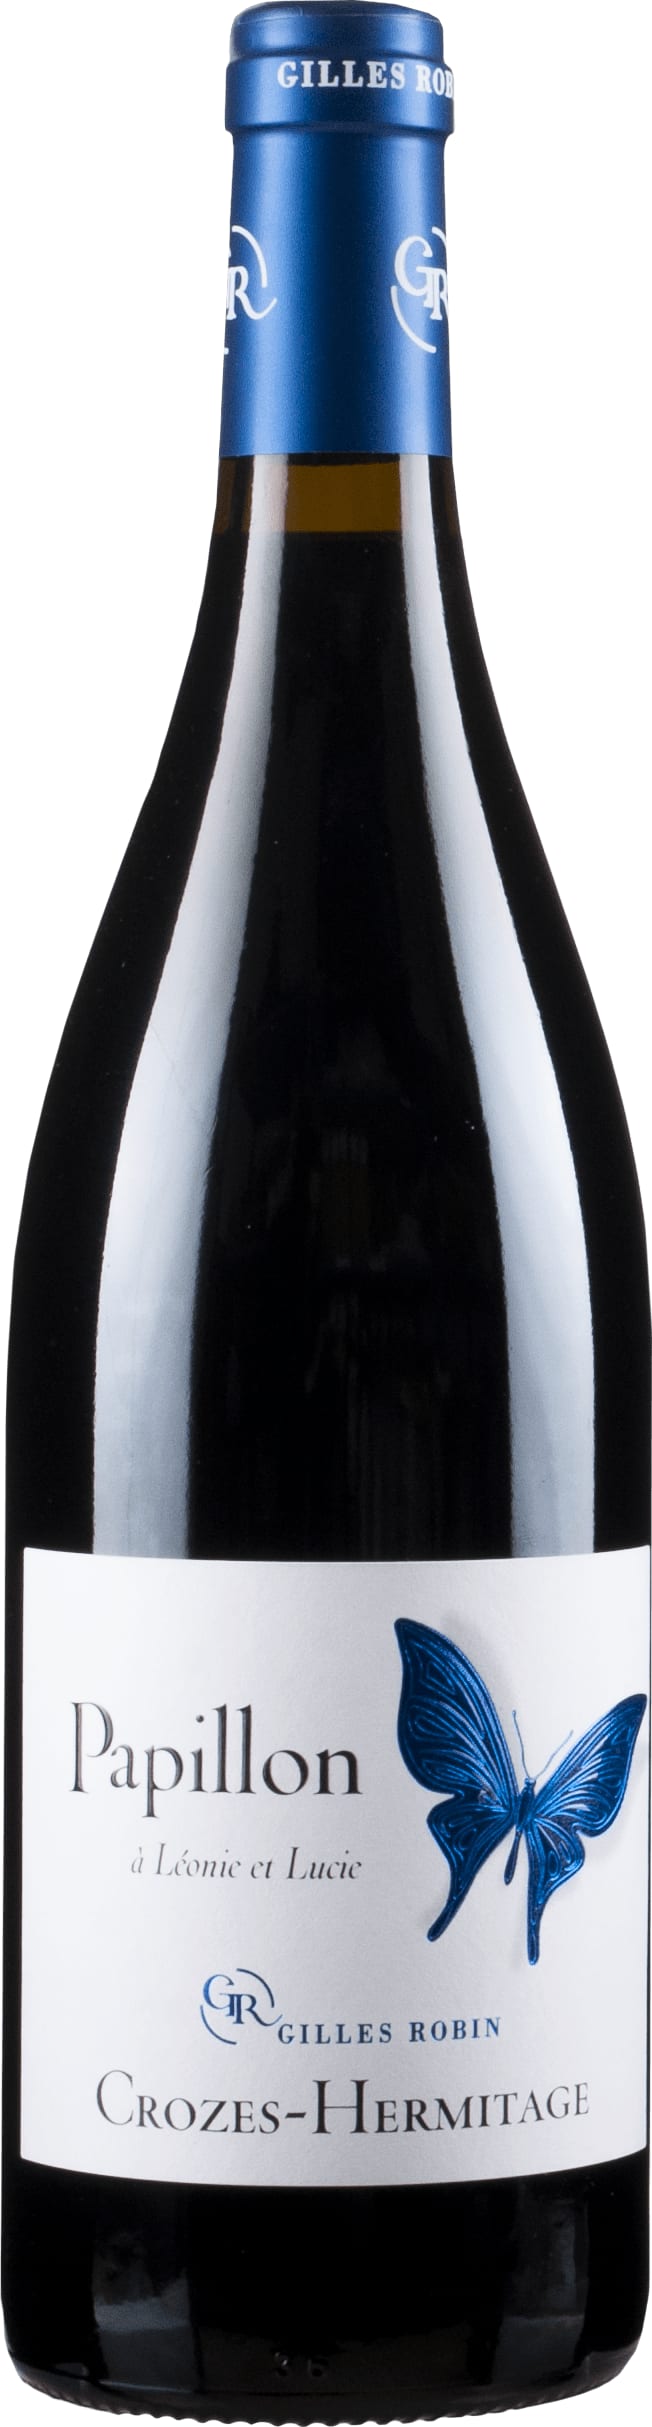 Gilles Robin Crozes-Hermitage 'Papillon' 2022 75cl - Buy Gilles Robin Wines from GREAT WINES DIRECT wine shop